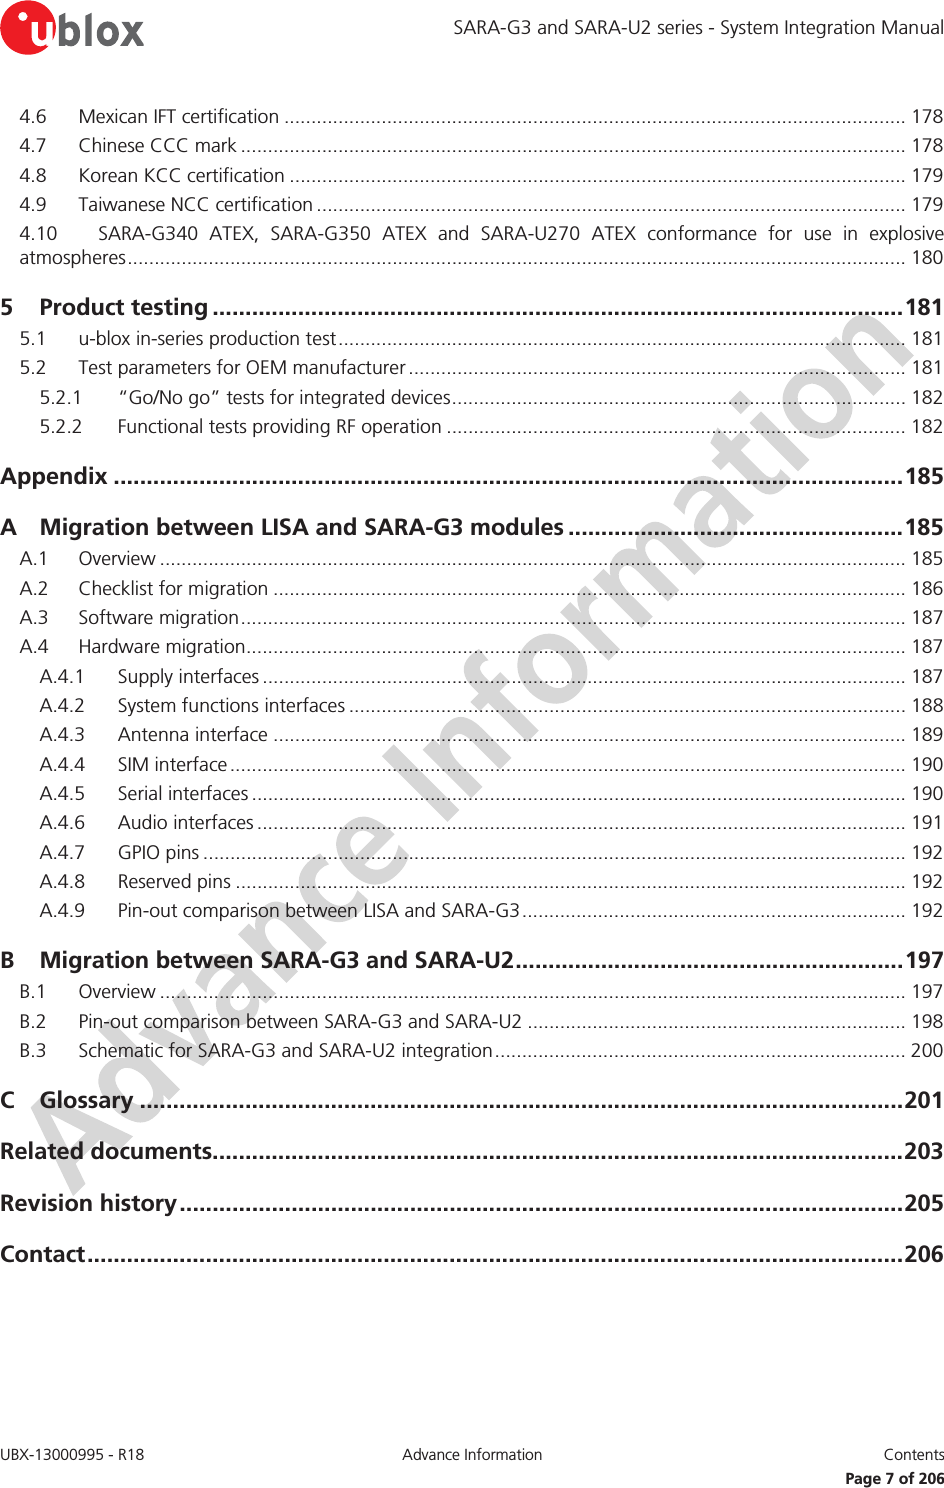 SARA-G3 and SARA-U2 series - System Integration Manual UBX-13000995 - R18  Advance Information  Contents   Page 7 of 206 4.6 Mexican IFT certification ................................................................................................................... 178 4.7 Chinese CCC mark ........................................................................................................................... 178 4.8 Korean KCC certification .................................................................................................................. 179 4.9 Taiwanese NCC certification ............................................................................................................. 179 4.10 SARA-G340 ATEX, SARA-G350 ATEX and SARA-U270 ATEX conformance for use in explosive atmospheres  ................................................................................................................................................ 180 5 Product testing ......................................................................................................... 181 5.1 u-blox in-series production test ......................................................................................................... 181 5.2 Test parameters for OEM manufacturer ............................................................................................ 181 5.2.1 “Go/No go” tests for integrated devices .................................................................................... 182 5.2.2 Functional tests providing RF operation ..................................................................................... 182 Appendix ........................................................................................................................ 185 A Migration between LISA and SARA-G3 modules ................................................... 185 A.1 Overview .......................................................................................................................................... 185 A.2 Checklist for migration ..................................................................................................................... 186 A.3 Software migration ........................................................................................................................... 187 A.4 Hardware migration.......................................................................................................................... 187 A.4.1 Supply interfaces ....................................................................................................................... 187 A.4.2 System functions interfaces ....................................................................................................... 188 A.4.3 Antenna interface ..................................................................................................................... 189 A.4.4 SIM interface ............................................................................................................................. 190 A.4.5 Serial interfaces ......................................................................................................................... 190 A.4.6 Audio interfaces ........................................................................................................................ 191 A.4.7 GPIO pins .................................................................................................................................. 192 A.4.8 Reserved pins ............................................................................................................................ 192 A.4.9 Pin-out comparison between LISA and SARA-G3 ....................................................................... 192 B Migration between SARA-G3 and SARA-U2 ........................................................... 197 B.1 Overview .......................................................................................................................................... 197 B.2 Pin-out comparison between SARA-G3 and SARA-U2 ...................................................................... 198 B.3 Schematic for SARA-G3 and SARA-U2 integration ............................................................................ 200 C Glossary .................................................................................................................... 201 Related documents......................................................................................................... 203 Revision history .............................................................................................................. 205 Contact ............................................................................................................................ 206  